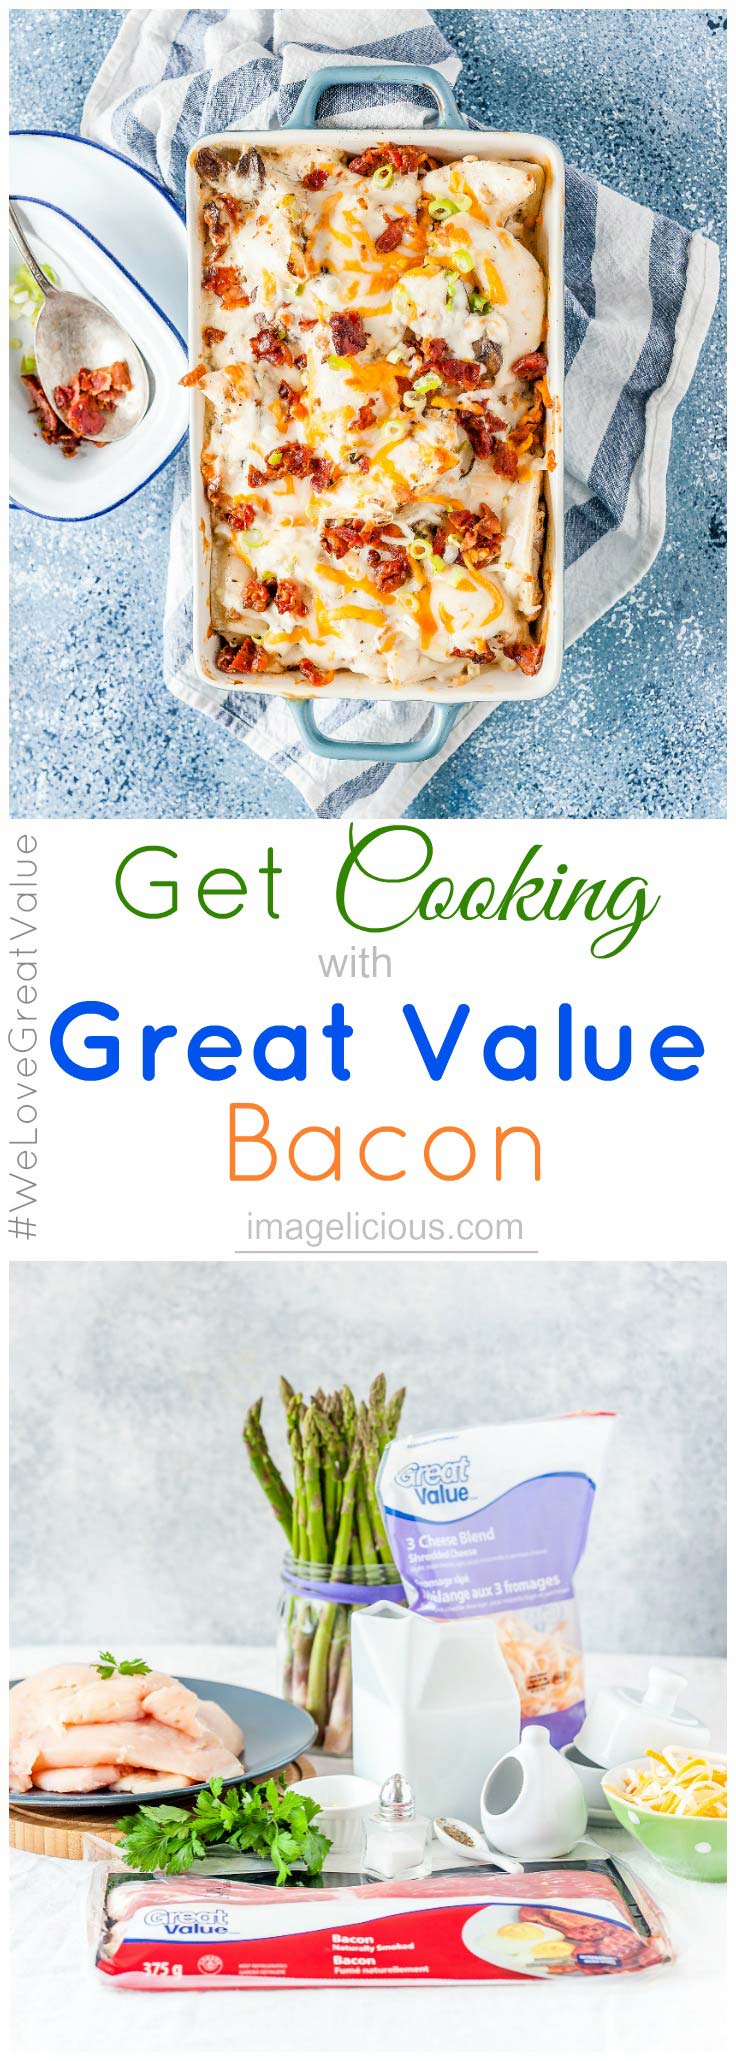 Everything is better with bacon, specially Great Value Bacon! Add bacon and a few asparagus spears to a humble chicken breast and you get a delicious, elegant, and really easy Bacon-Wrapped Chicken - perfect for a weeknight meal or a fancy weekend dinner. Crumble some crispy bacon over cheesy and creamy Perogie Casserole for an ultra satisfying and cozy supper | #WeLoveGreatValue #Ad | Imagelicious